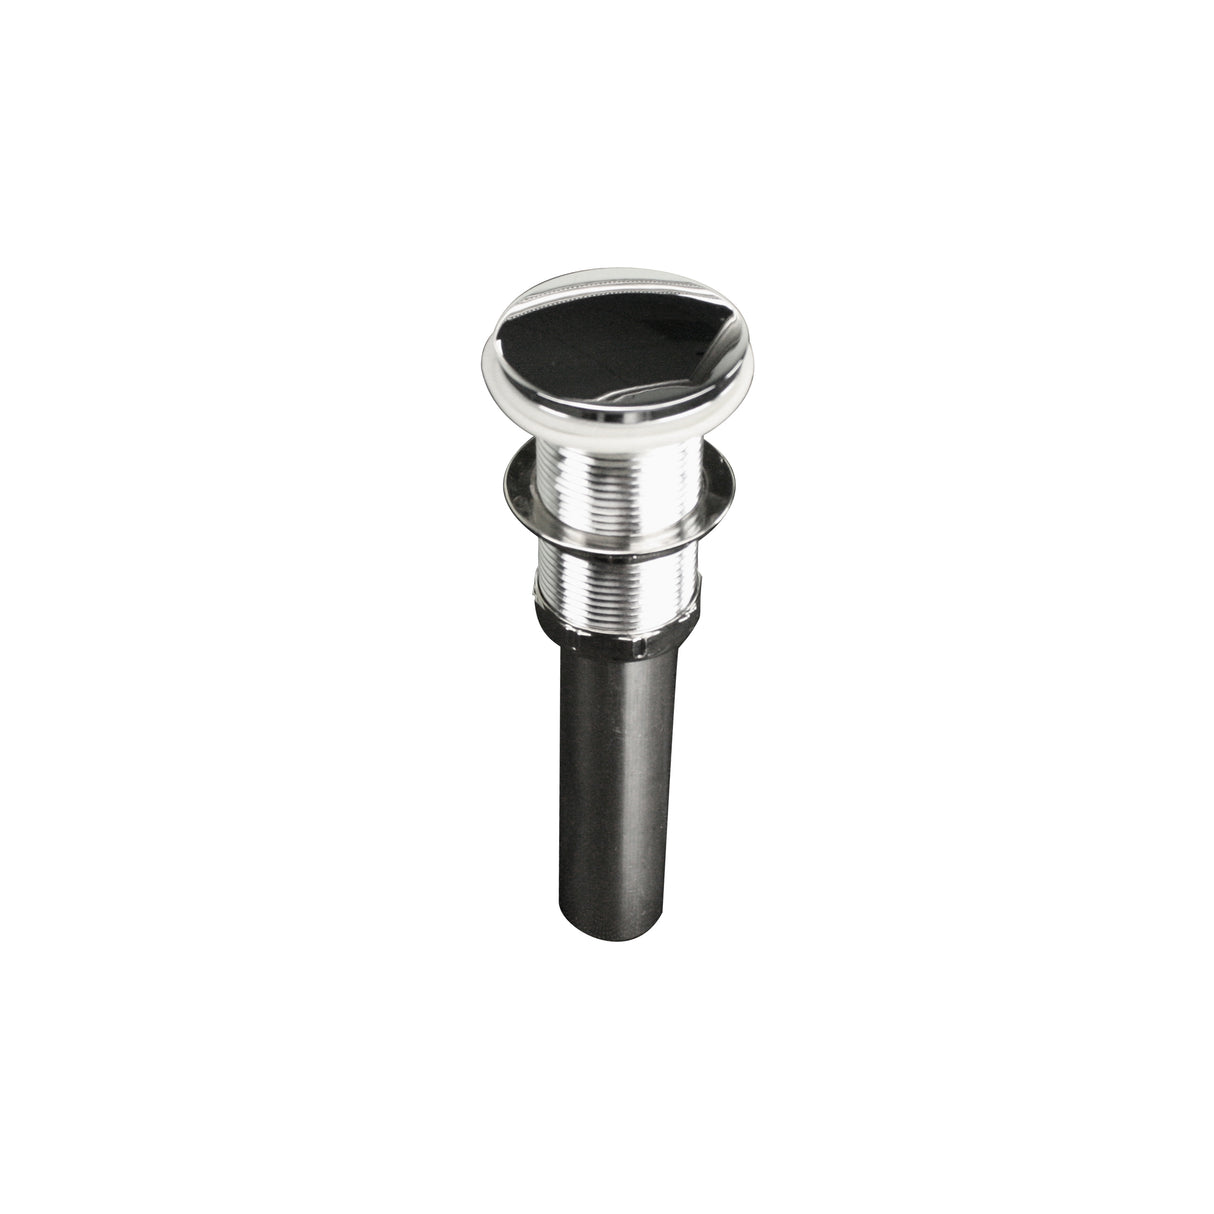 Nantucket Sinks' Chrome Finish Umbrella Drain With Overflow NS-UDC-OF